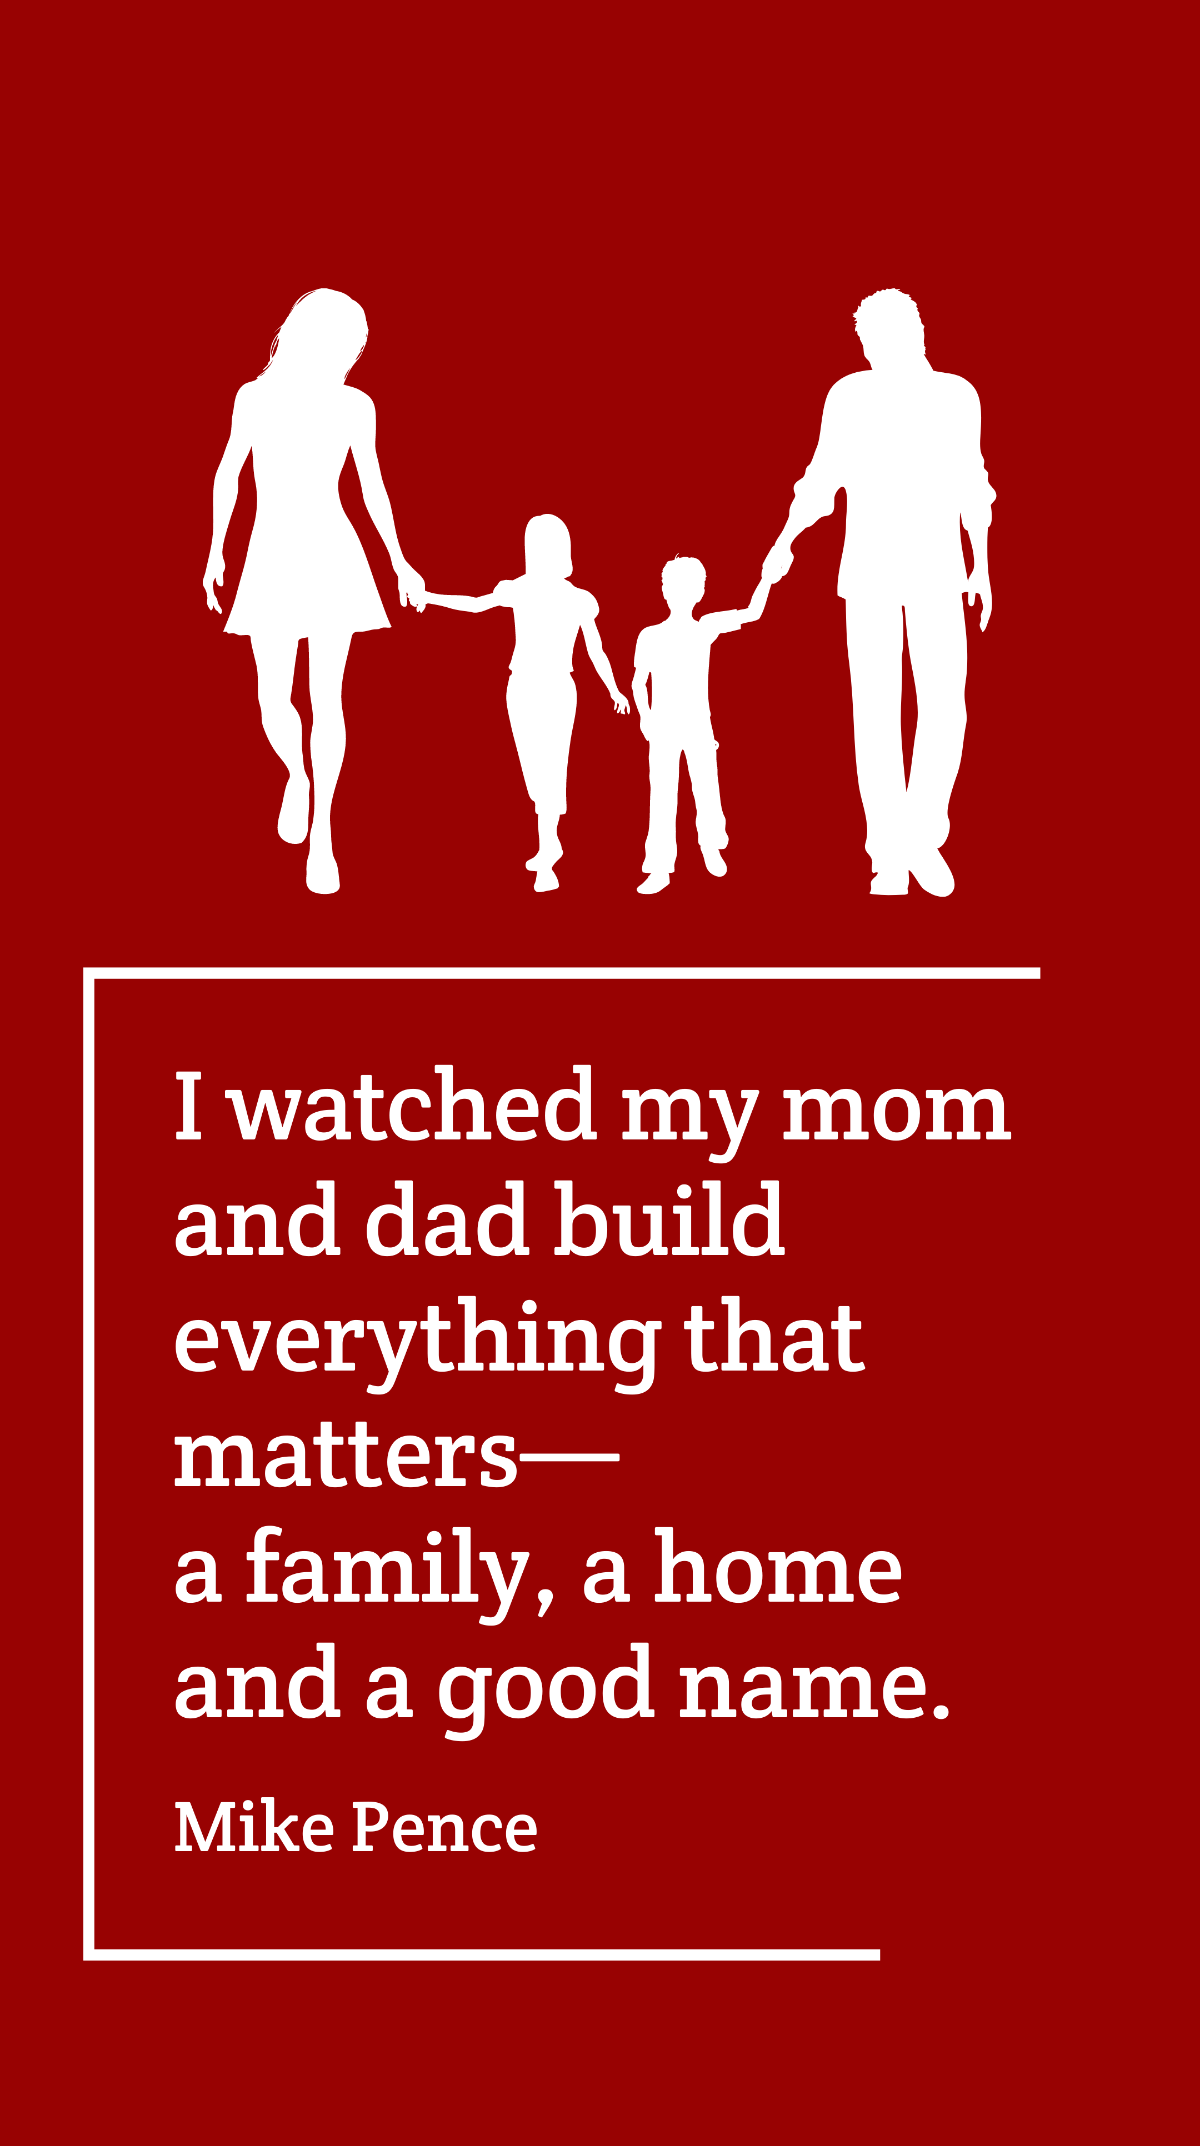 Mike Pence - I watched my mom and dad build everything that matters - a family, a home and a good name. Template